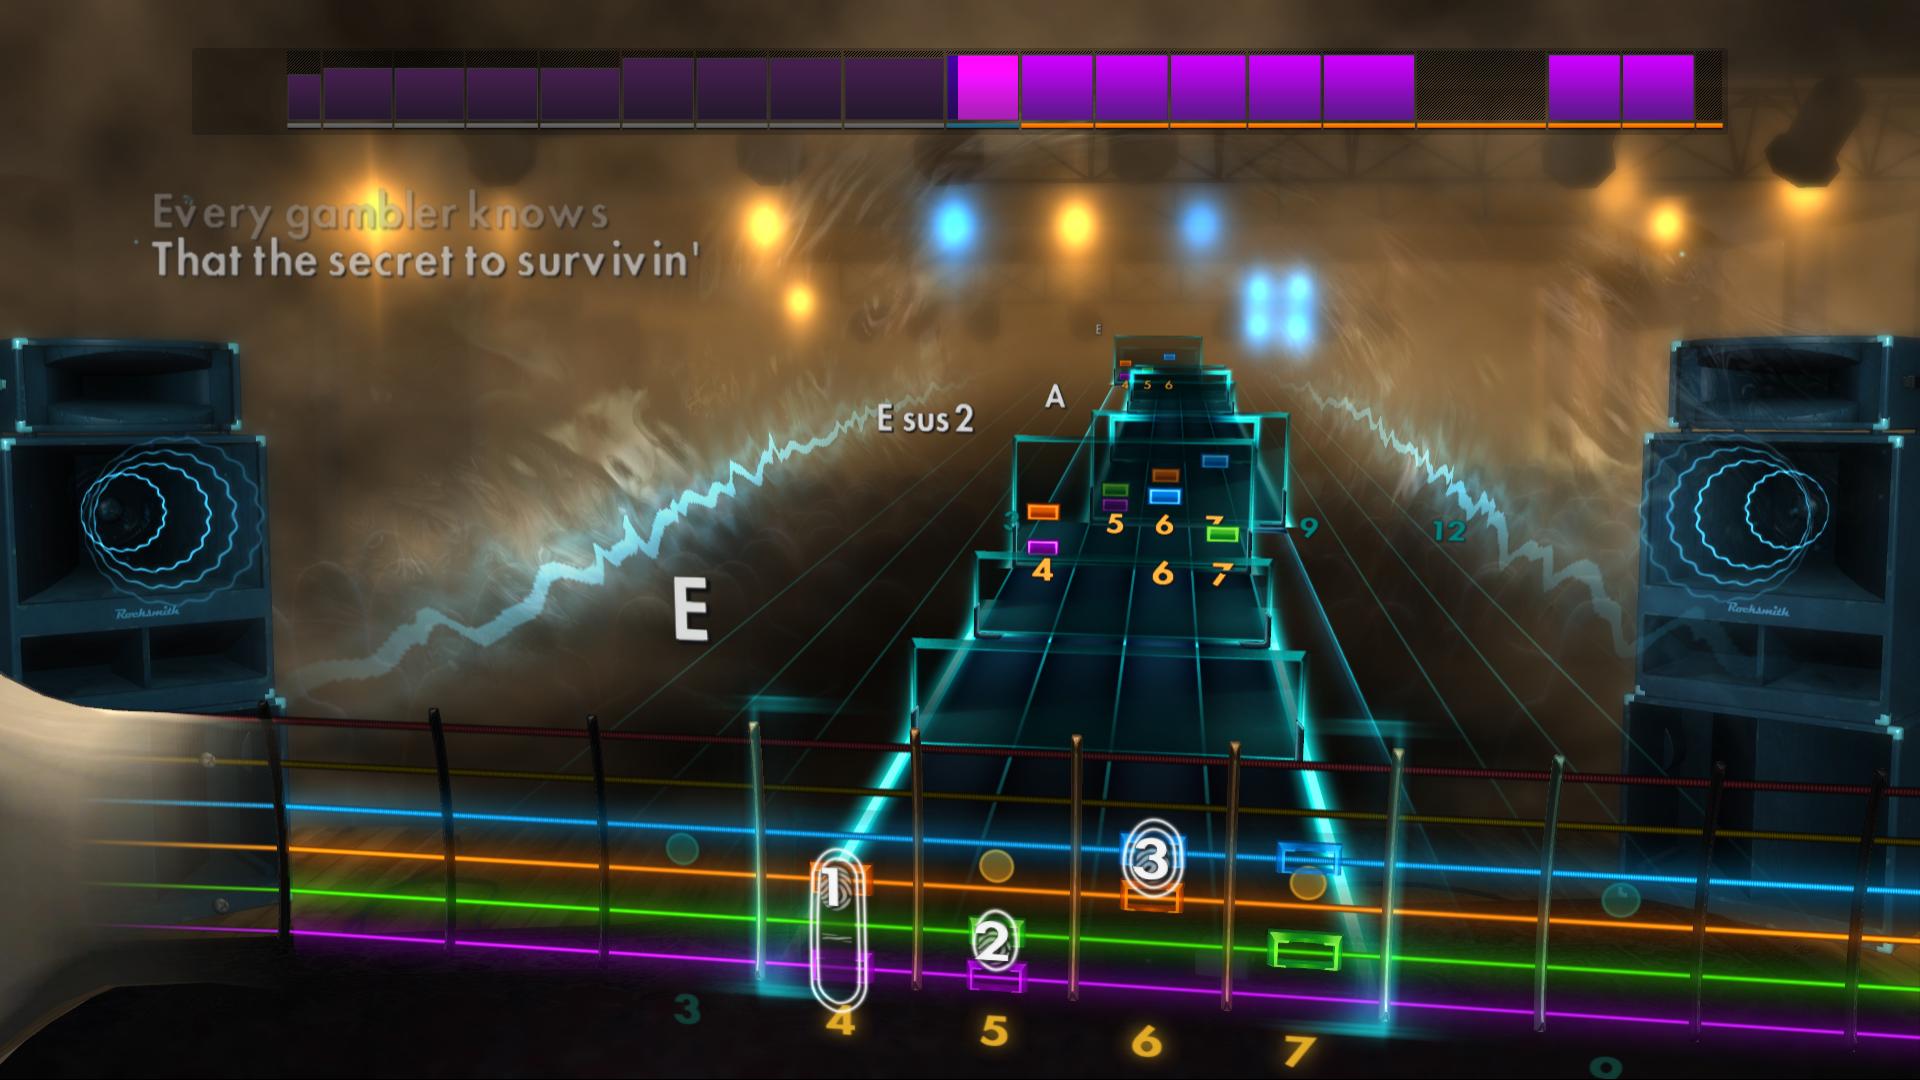 Rocksmith® 2014 – Anniversary Song Pack on Steam